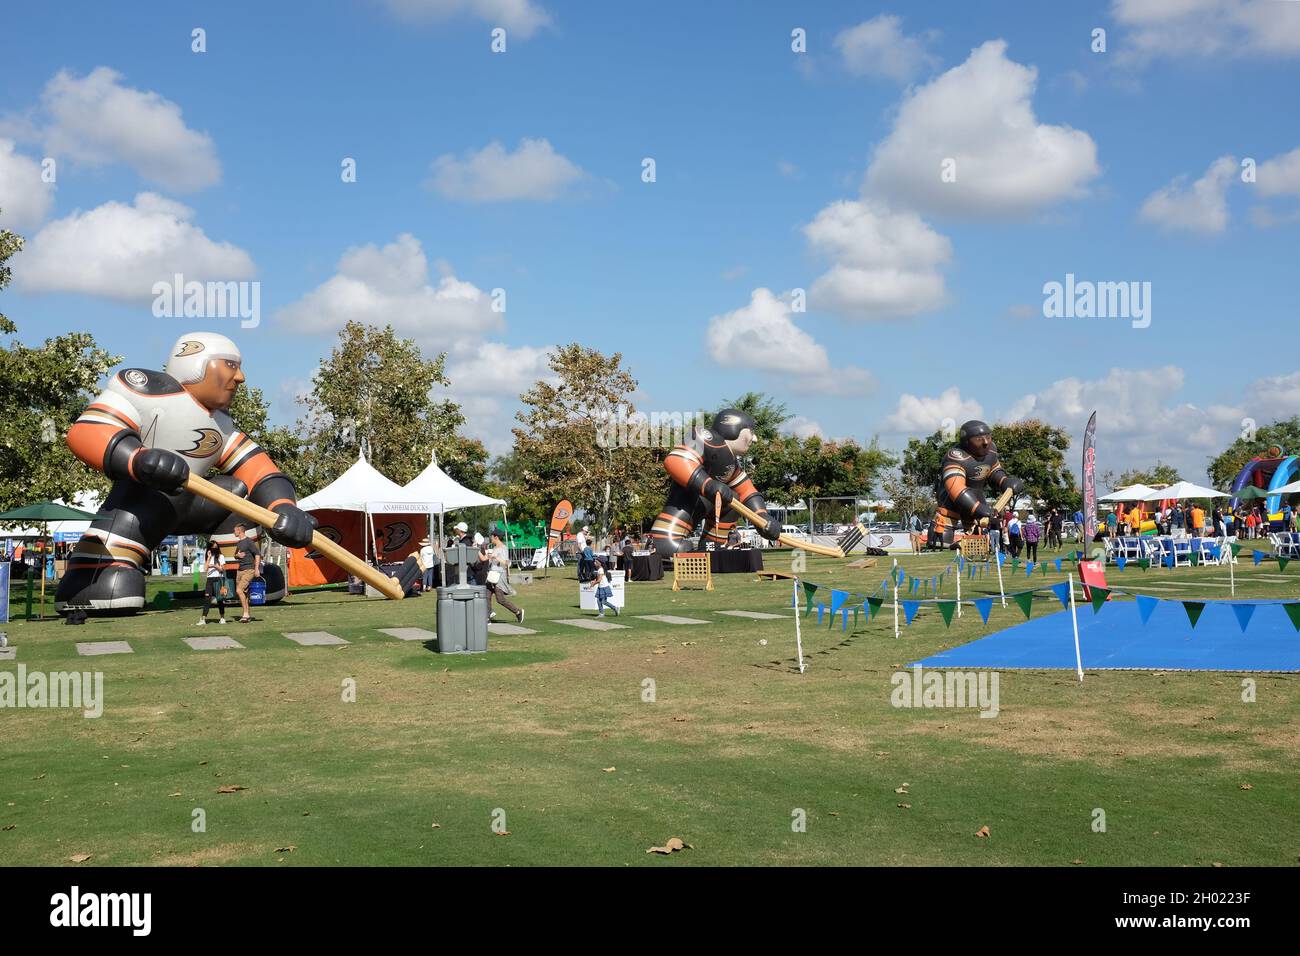 IRVINE, CALIFORNIA - 9 OCT 2021: Inflatable Anaheim Ducks Hockey Players at the Irvine Global Village Festival, an annual event held at the Great Park Stock Photo